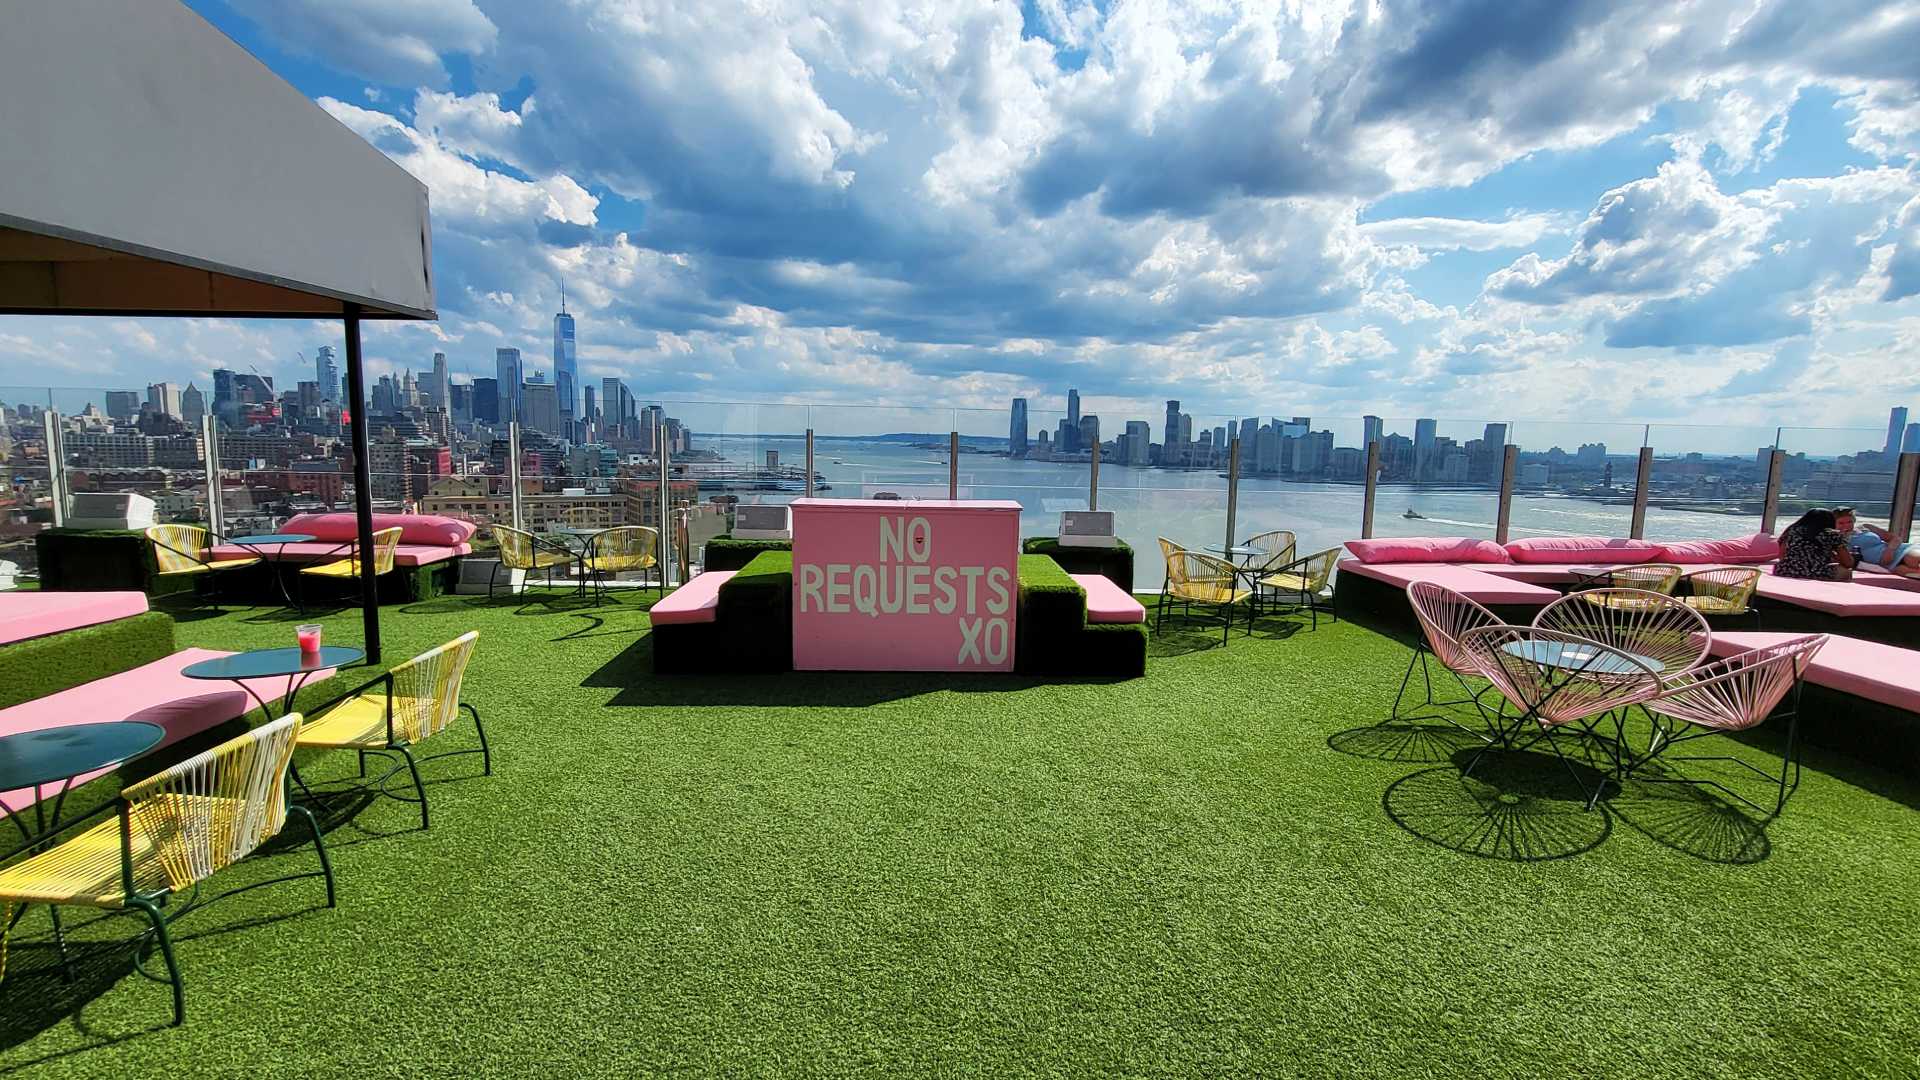 Pink no requests sign at DJ booth on artificial grass rooftop bar